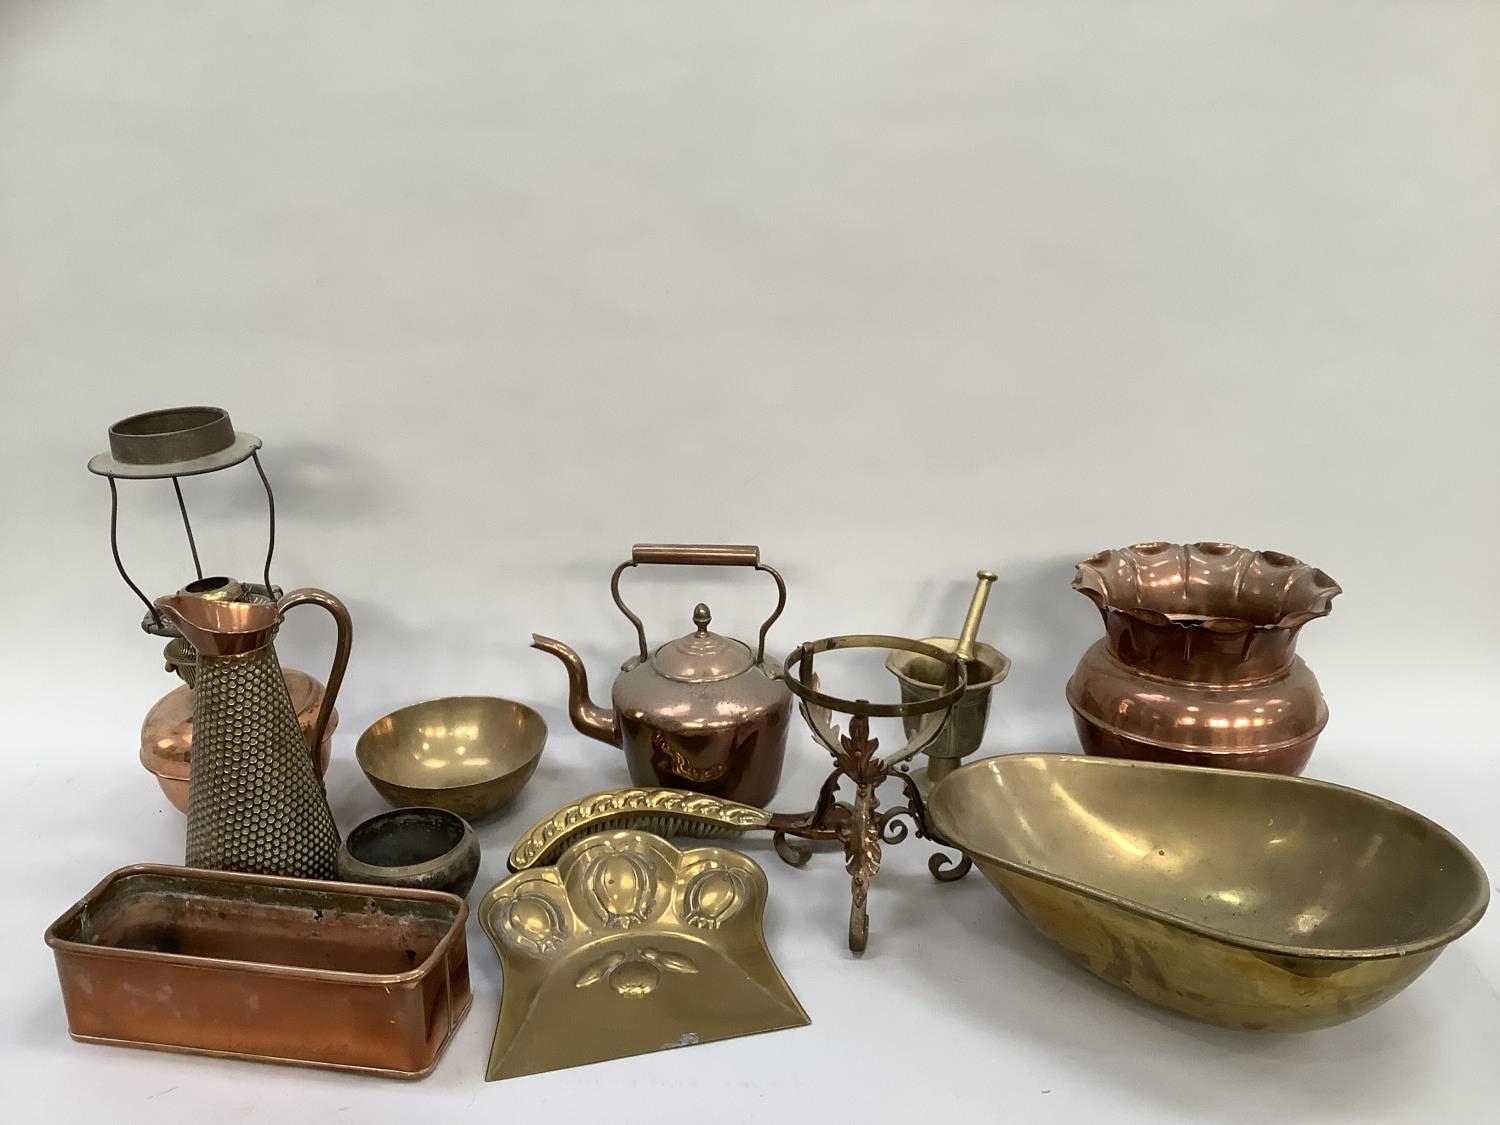 A quantity of brass and copper comprising brass pestle and mortar, copper kettle, Benares style